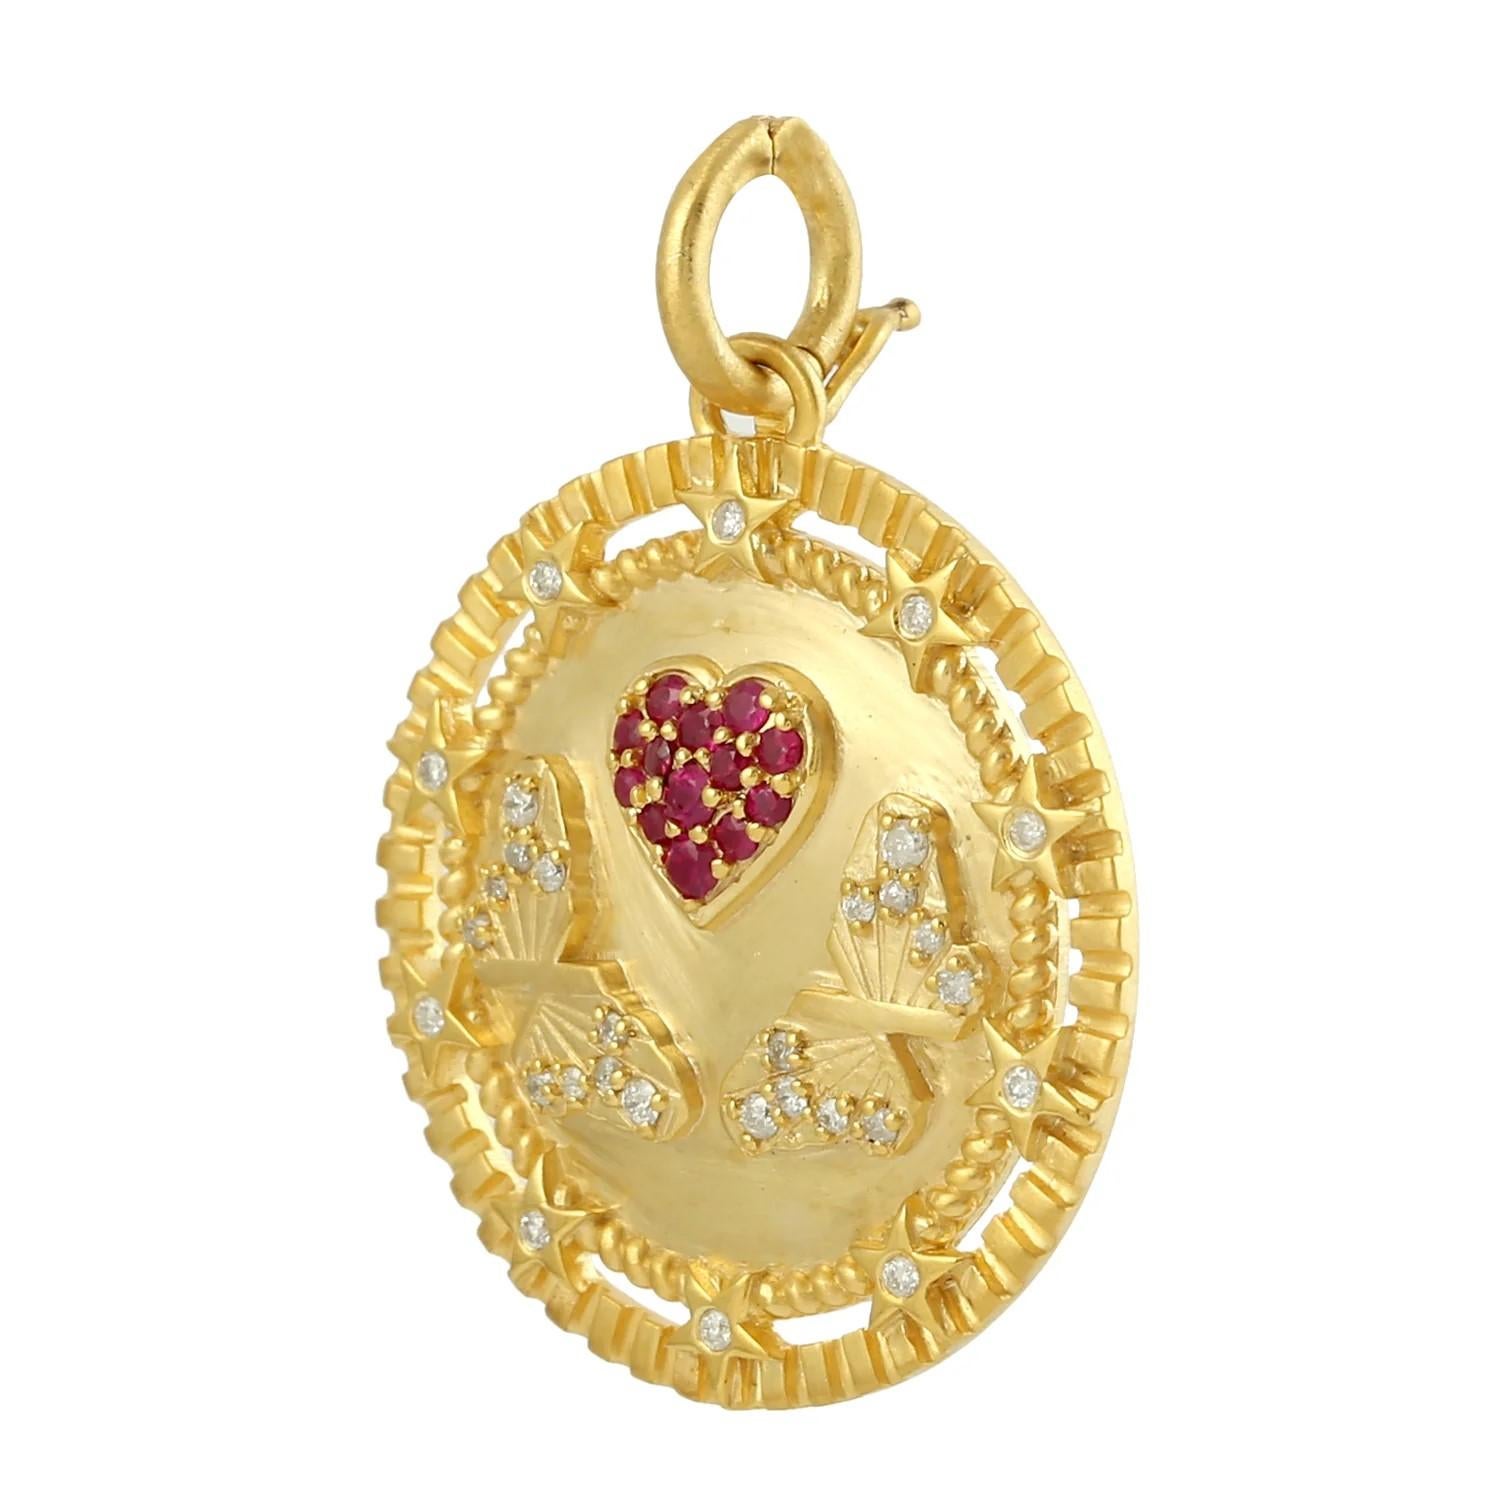 This medallion charm has been meticulously crafted from 14-karat gold and set in .23 carats ruby & .18 carats of sparkling diamonds. 

FOLLOW  MEGHNA JEWELS storefront to view the latest collection & exclusive pieces.  Meghna Jewels is proudly rated